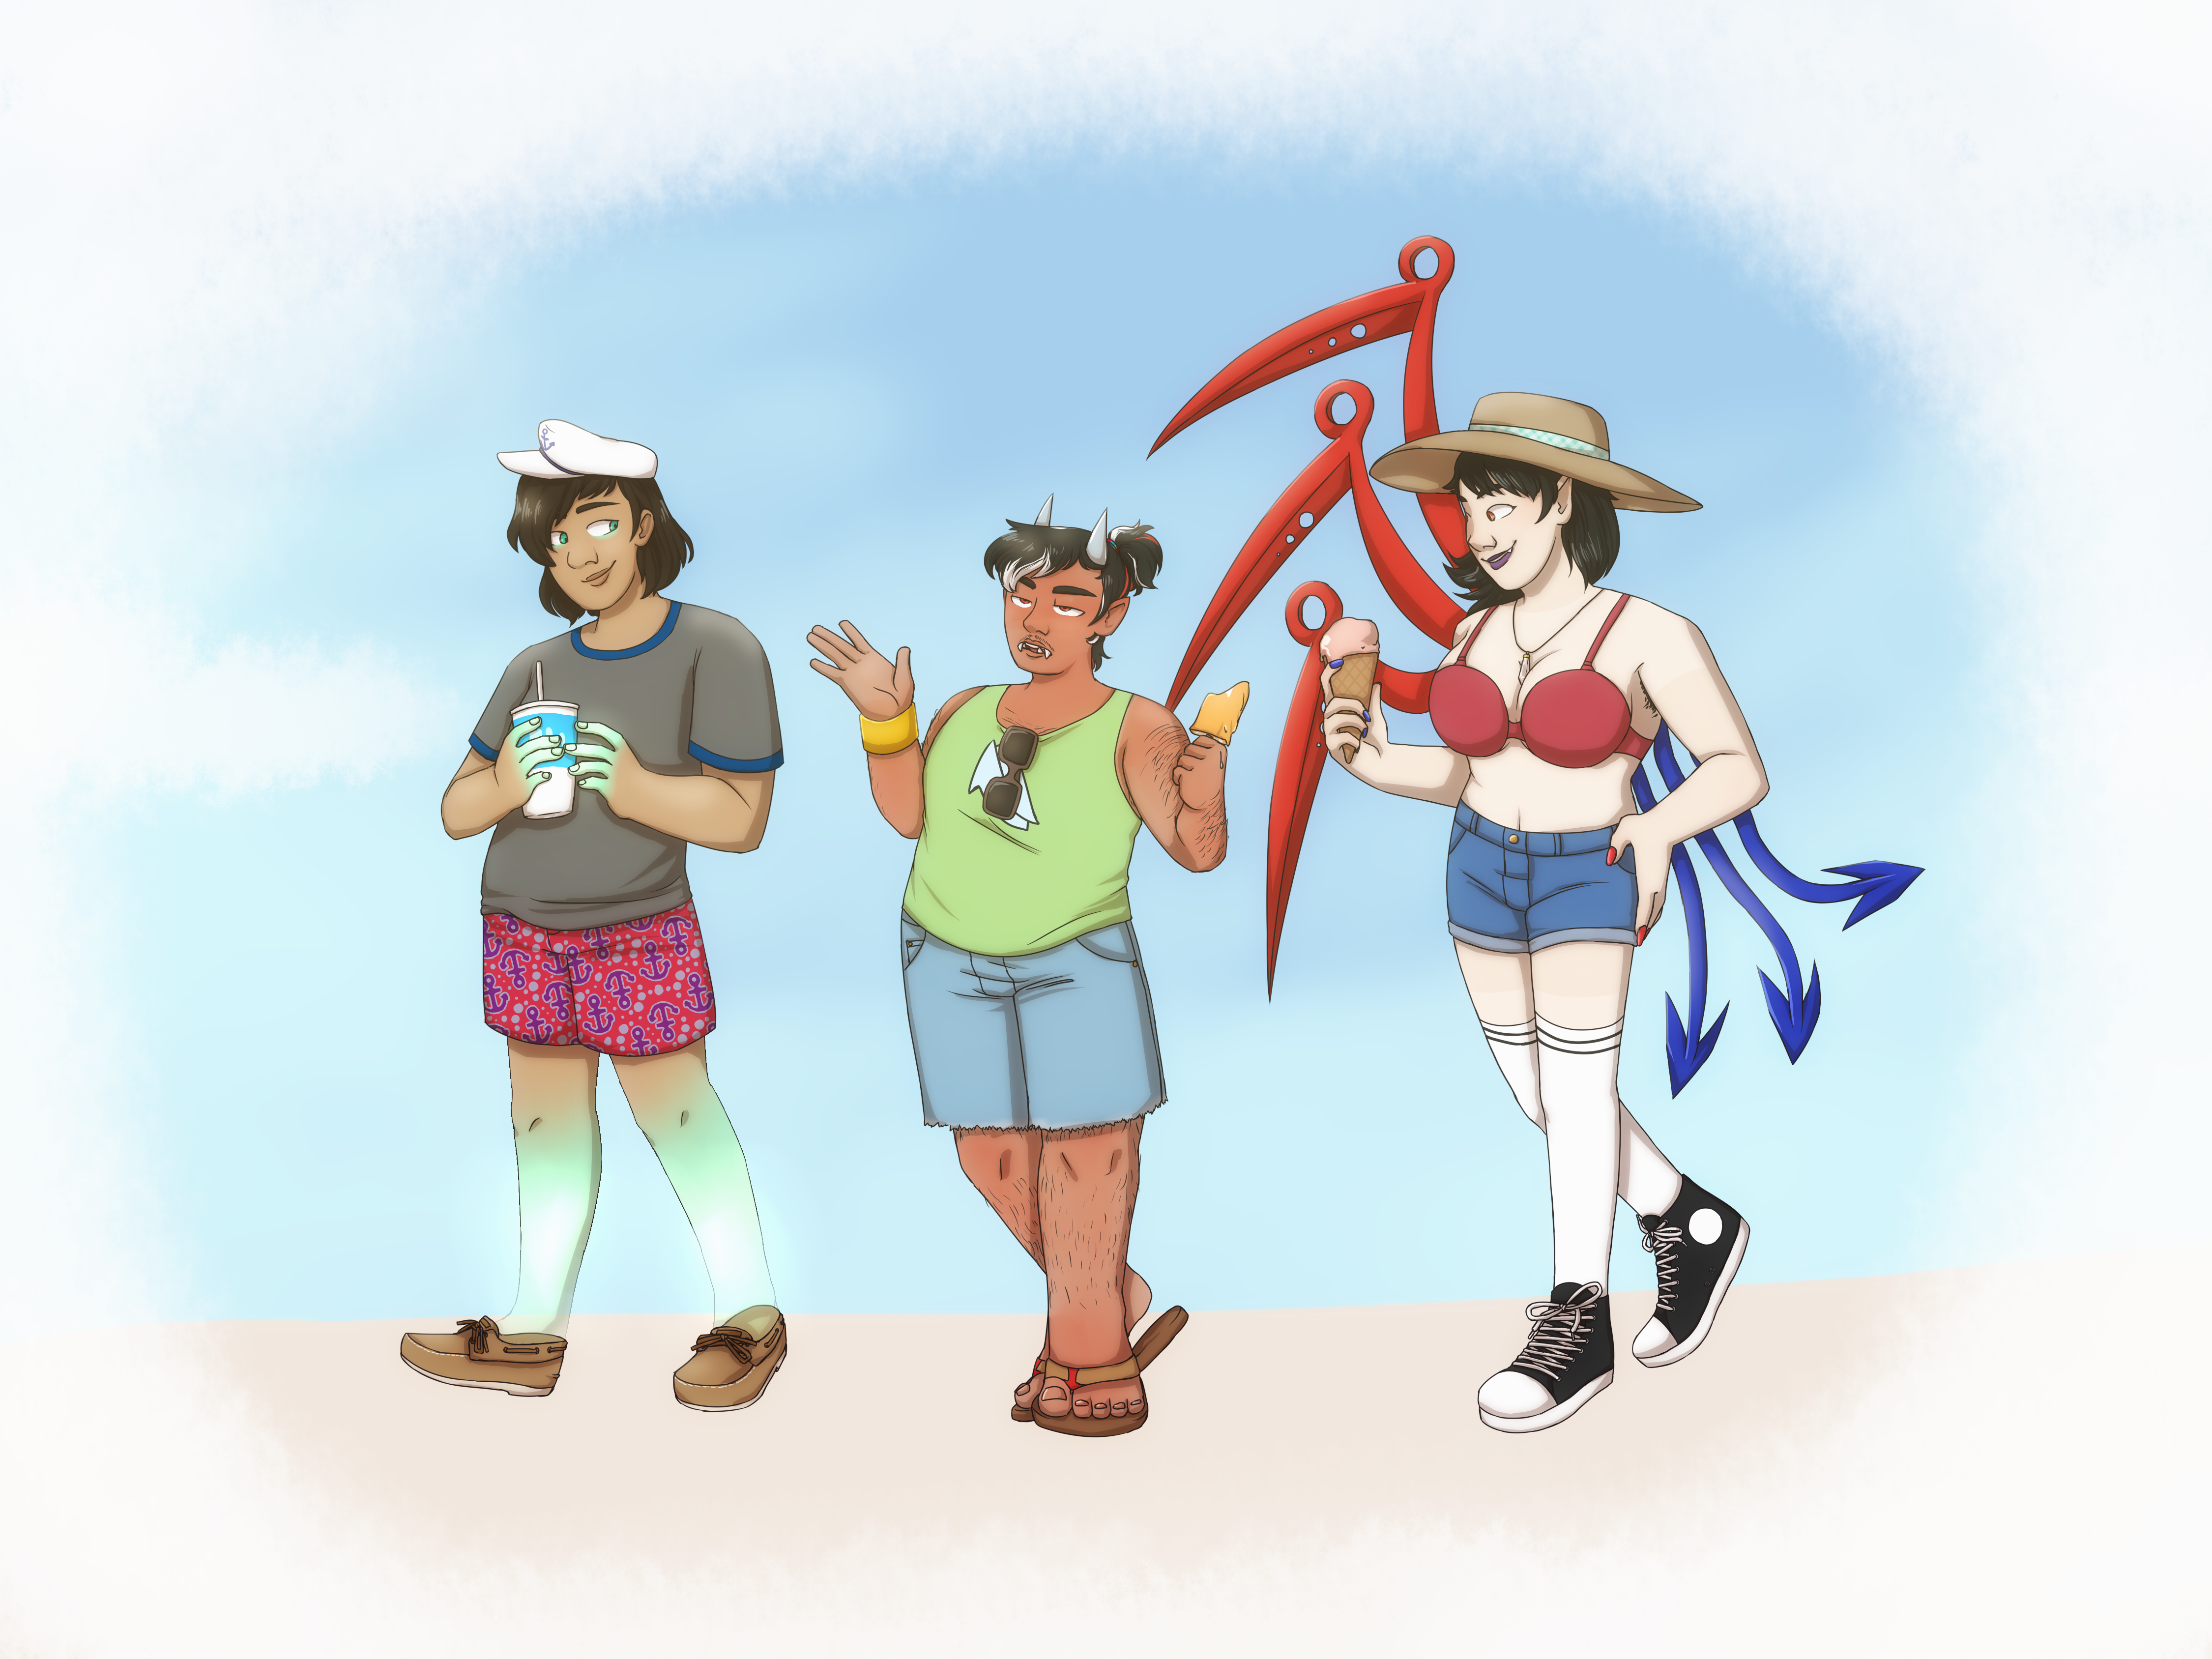 a drawing of Captain Murasa, Kijin Seija, and Houjuu Nue from Touhou. They're all dressed in summery clothes and each is holding a different cold treat. Seija looks to be talking about something, holding the attention of the other two